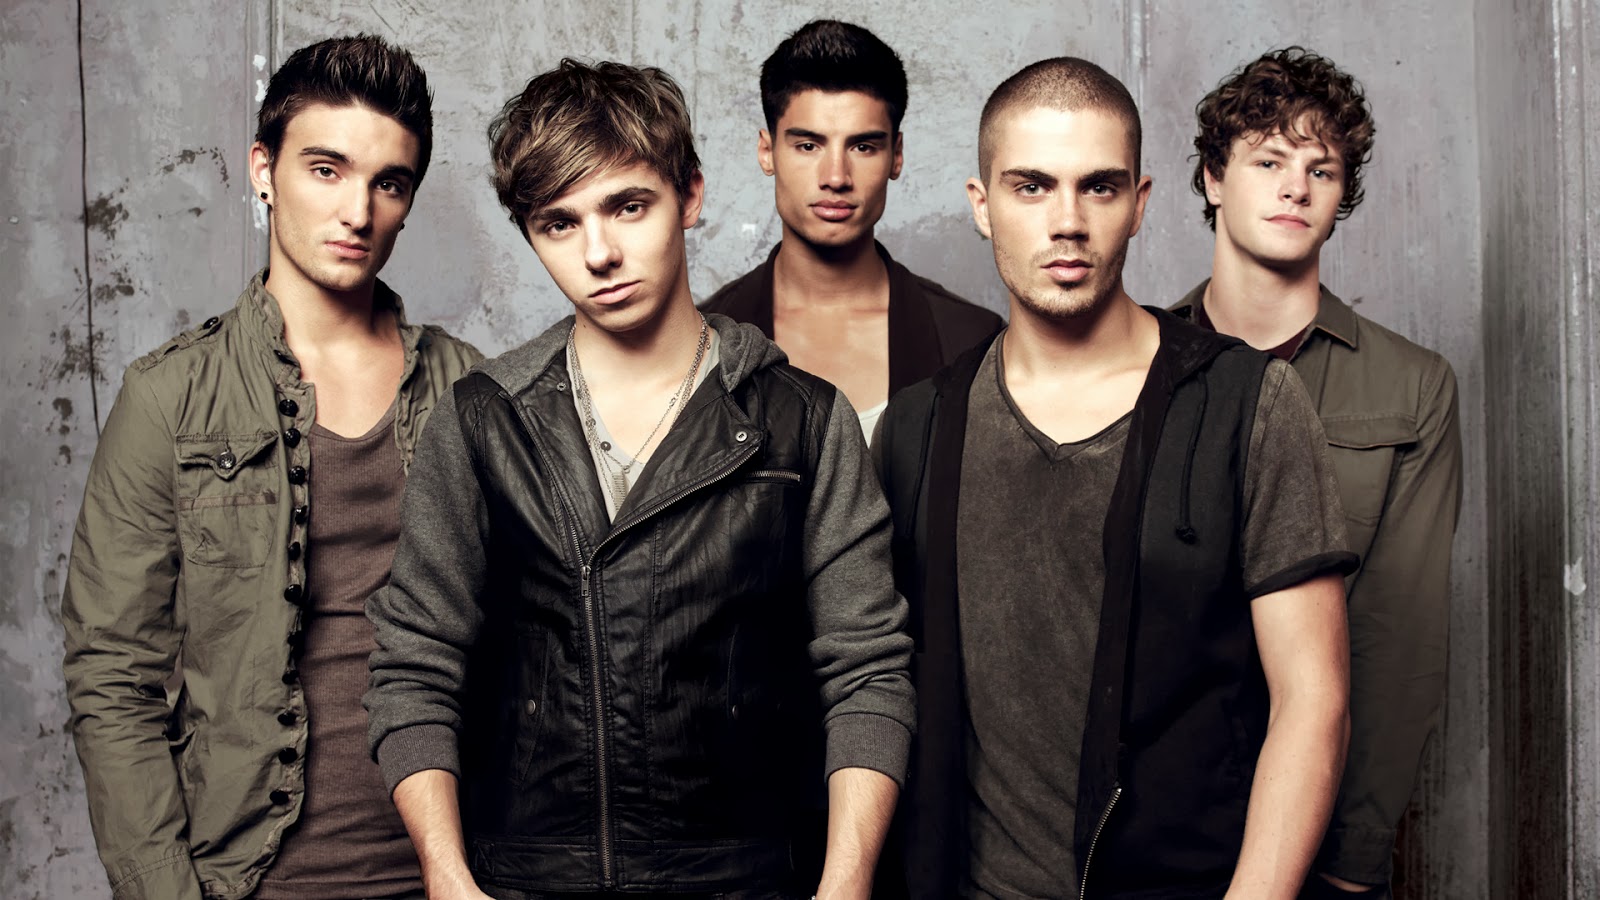 The Wanted, joined by The Vamps and Elyar Fox, will be playing the Birmingham LG Arena in March